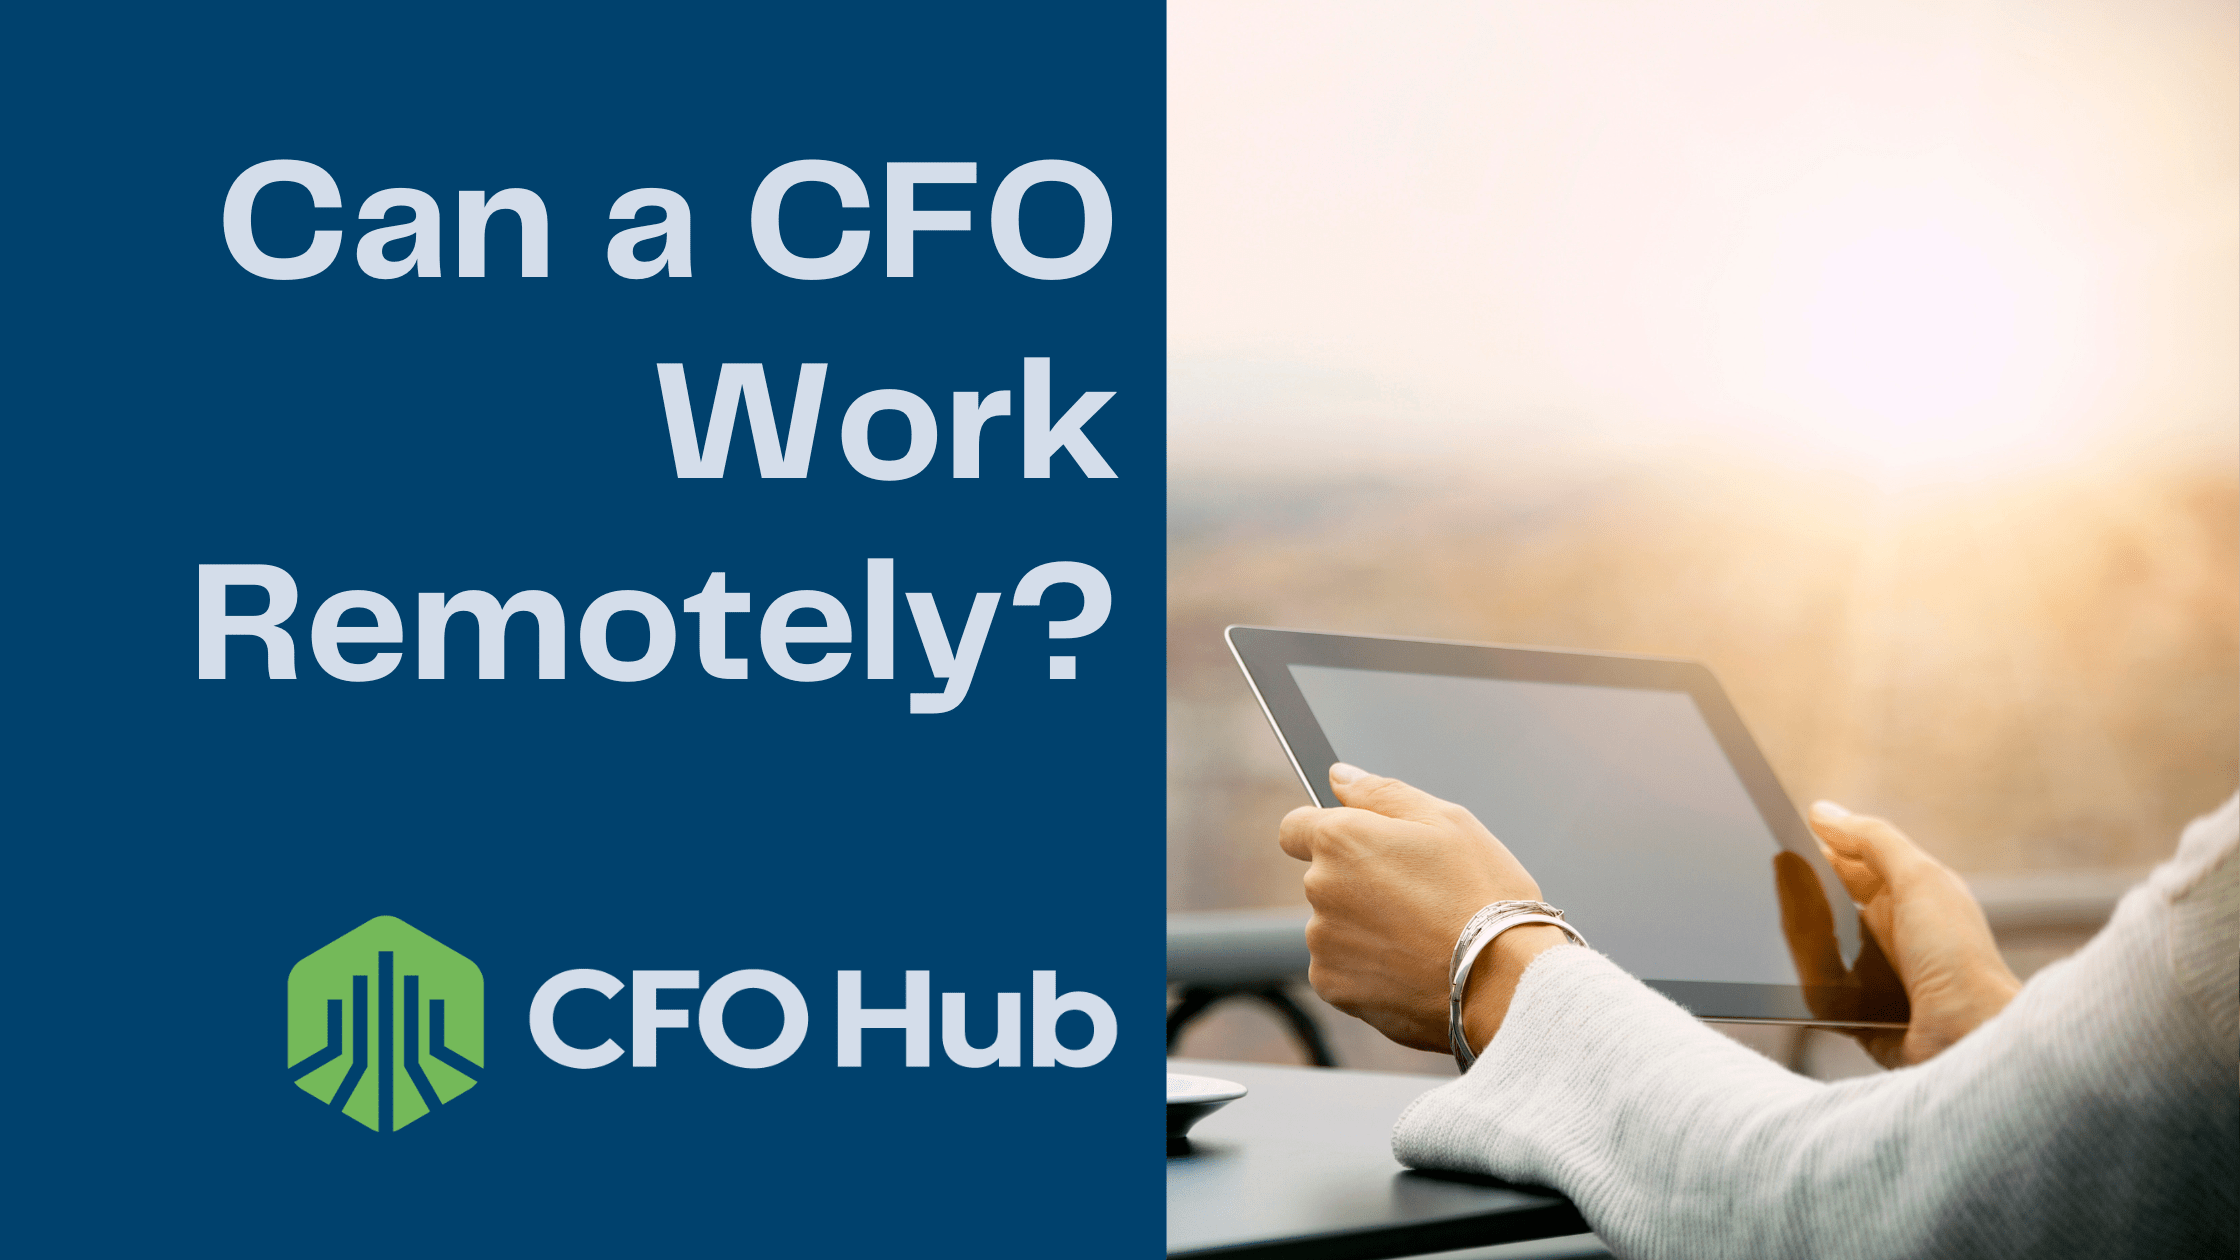 A person holds a tablet while sitting at a table, with a soft background of a sunrise or sunset. The image includes the text "Can a CFO Work Remotely?" and the logo for CFO Hub, highlighting the growing trend of remote work for financial executives.